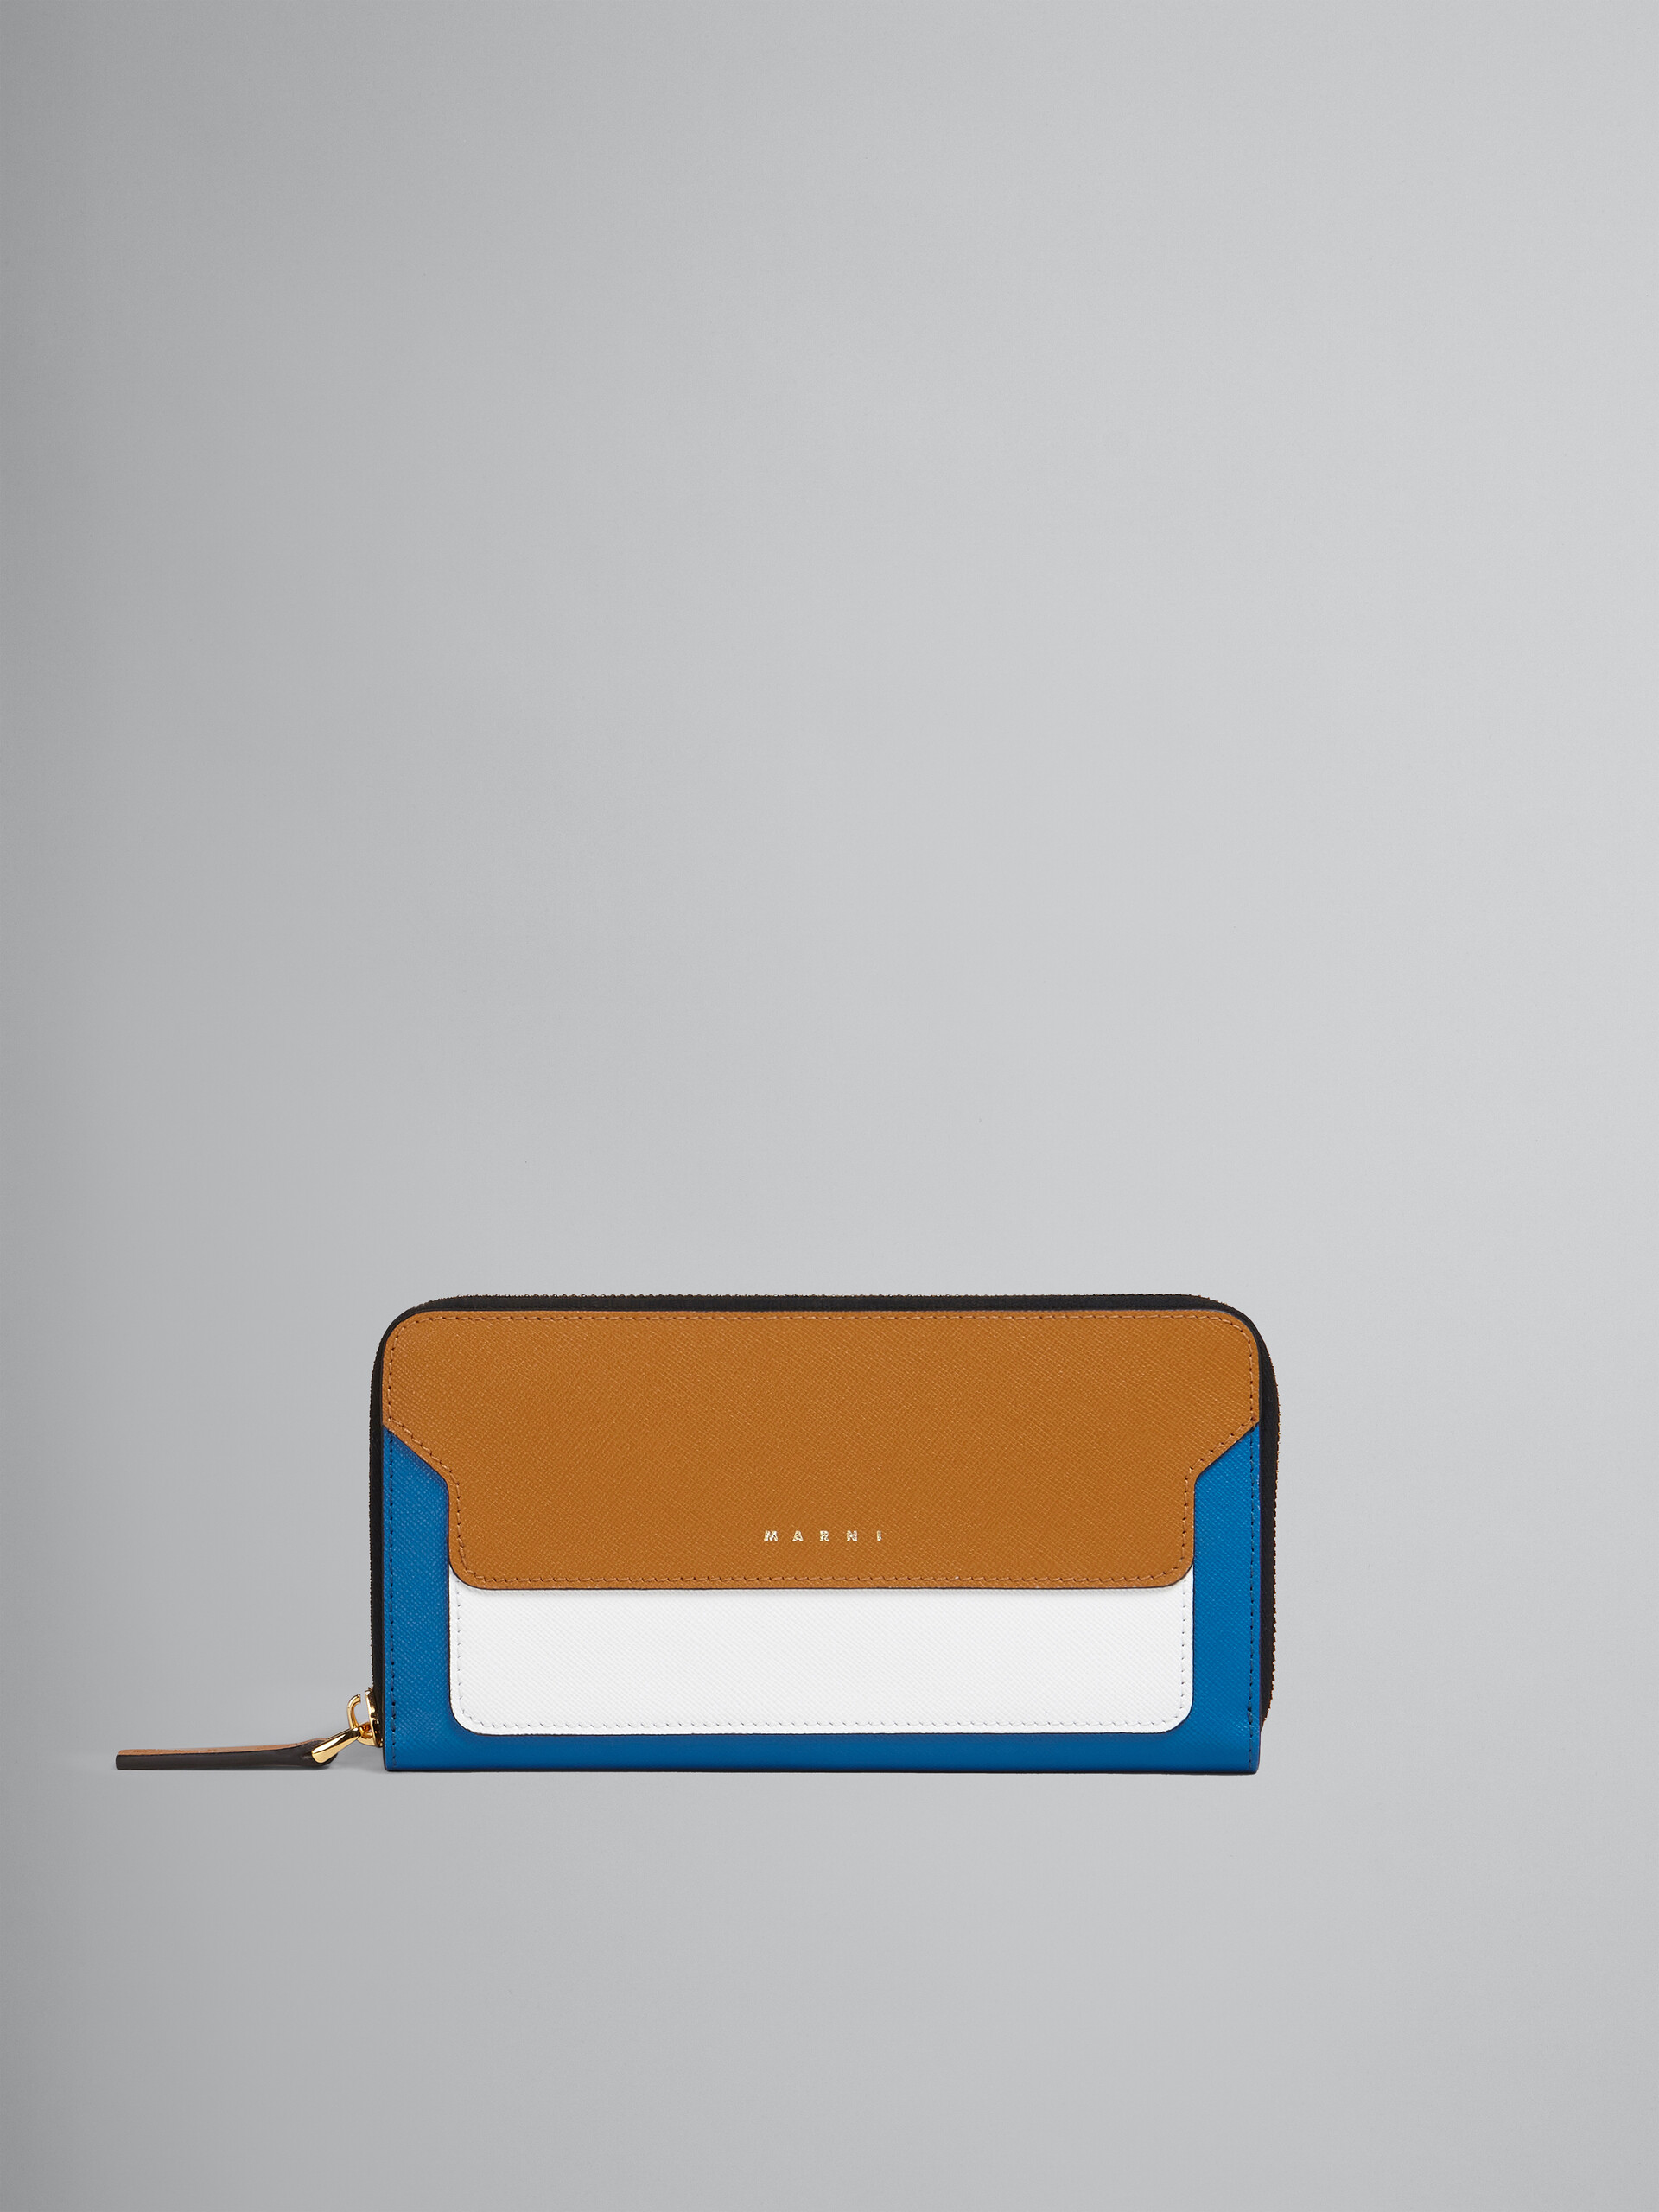 Brown white and blue saffiano leather zip-around wallet